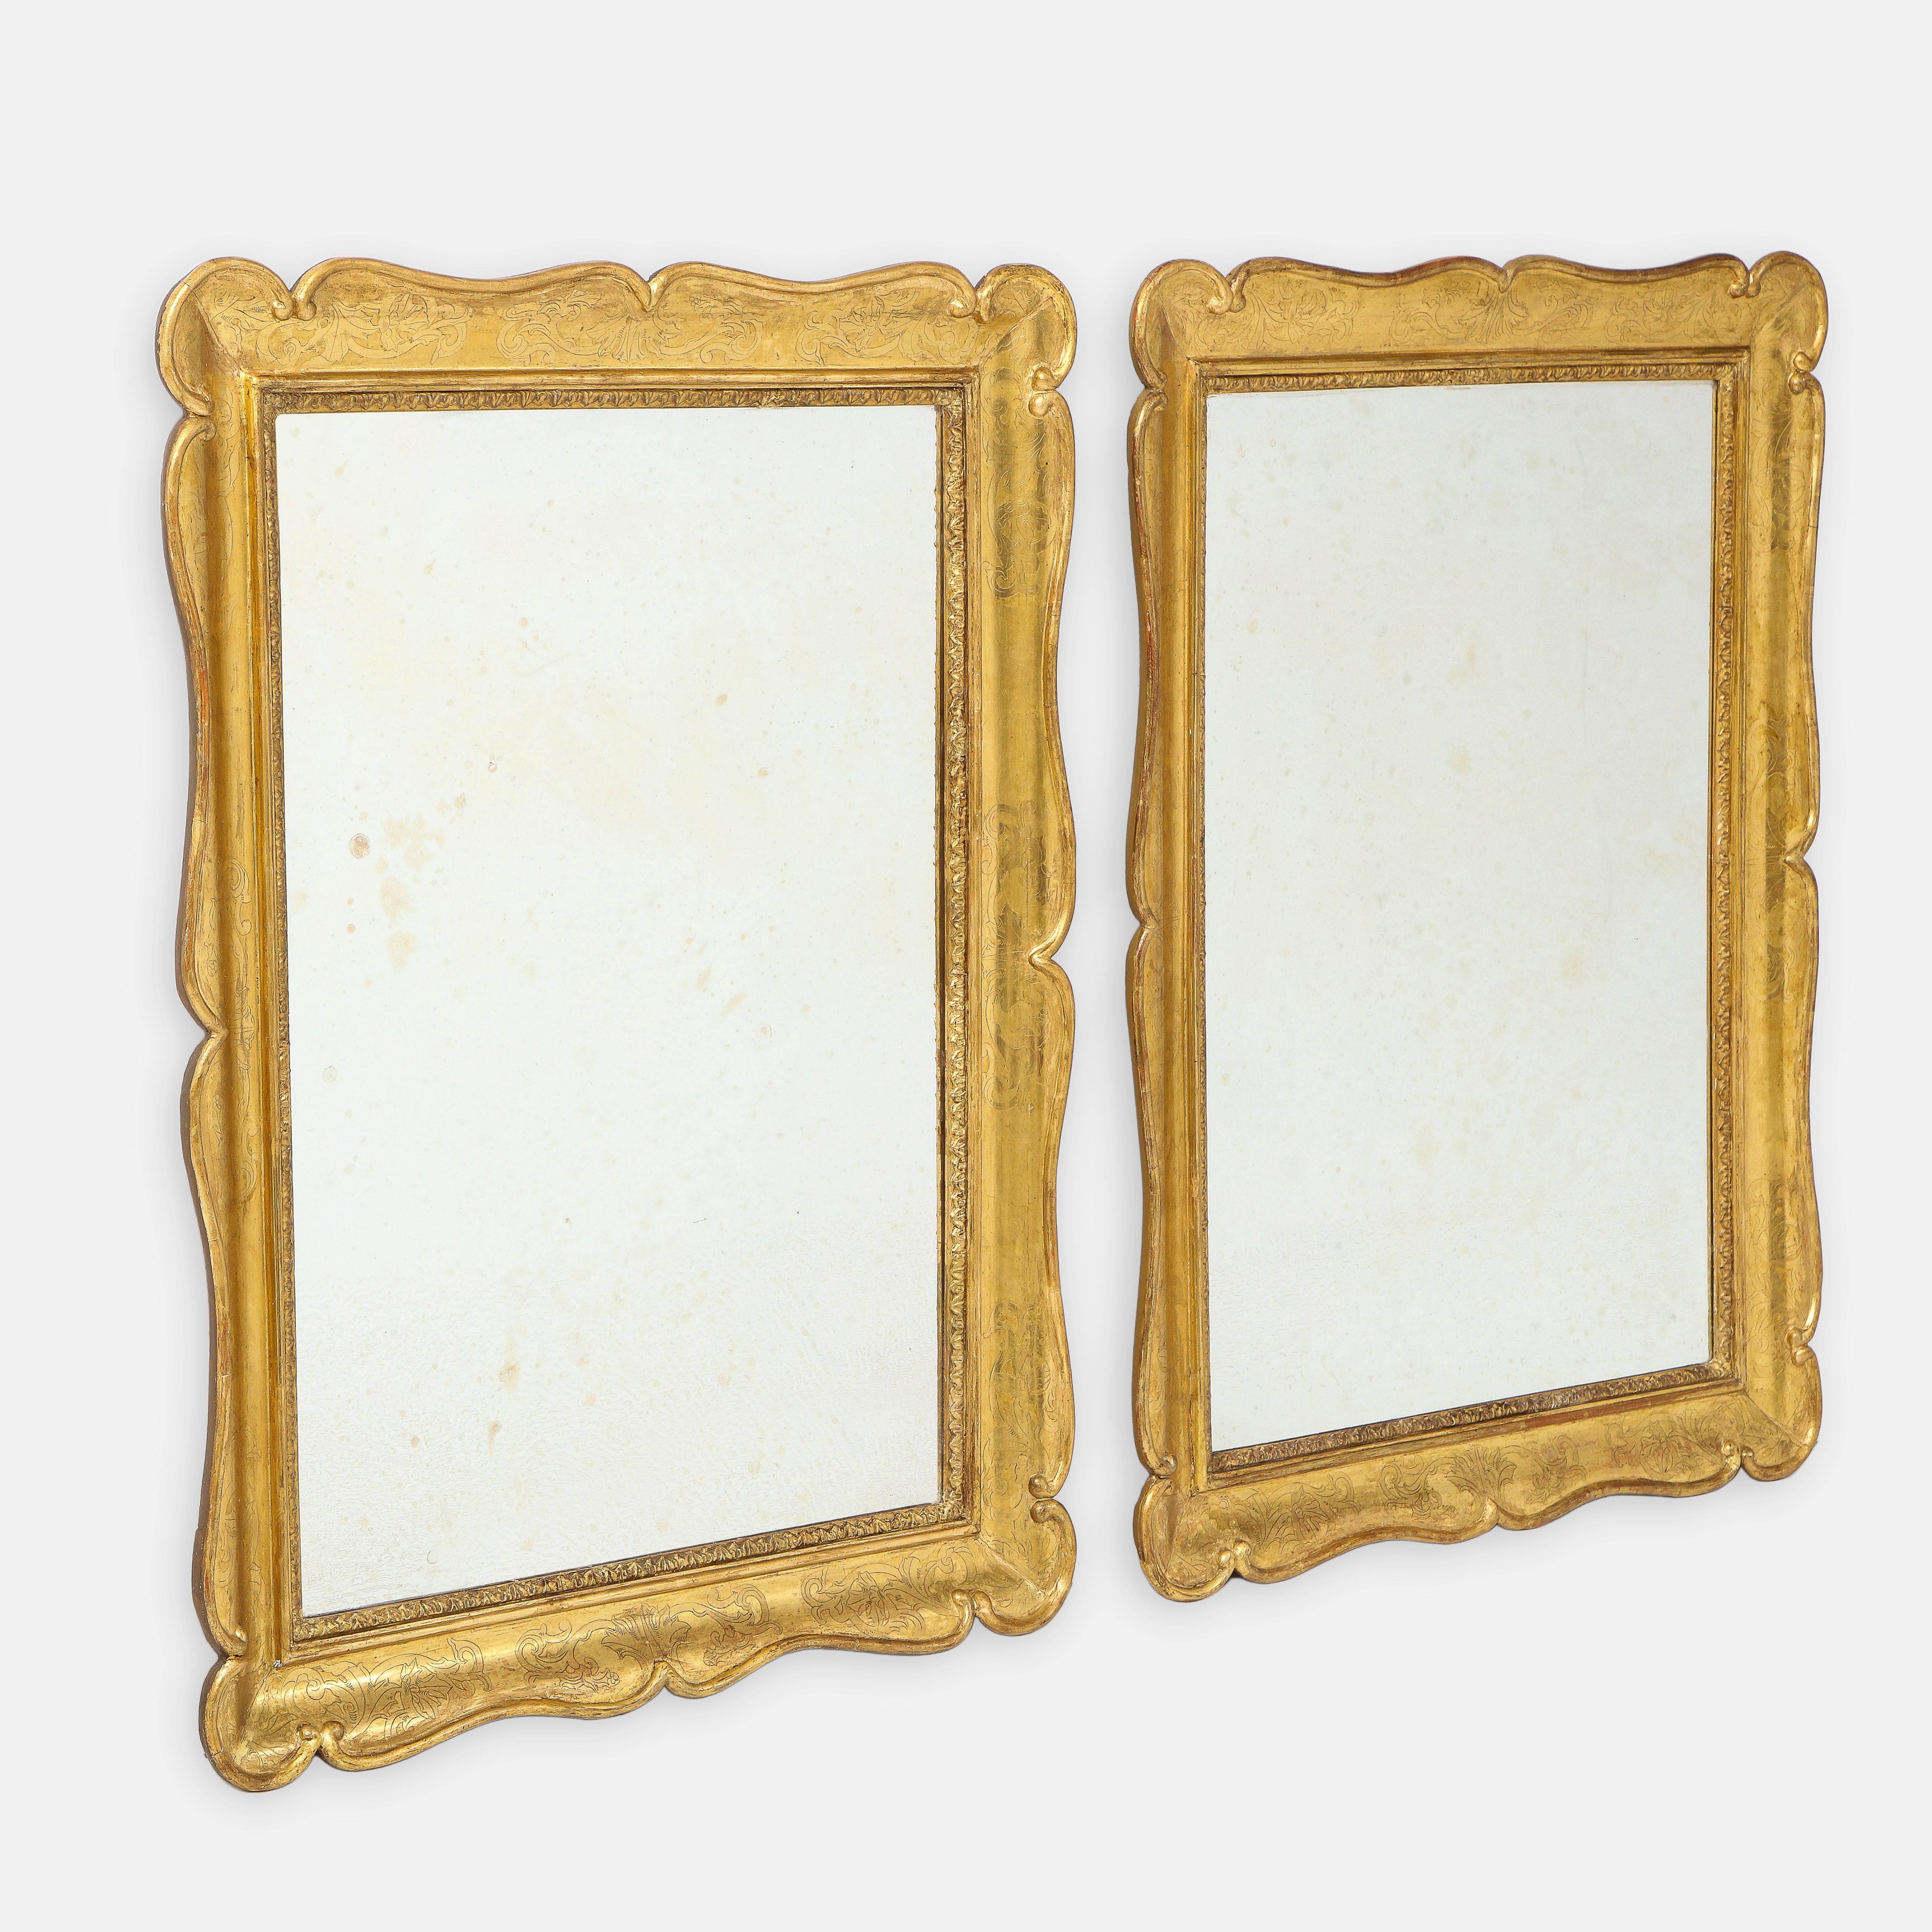 Pair of exquisite 19th century Italian rectangular carved giltwood mirrors. Each lovely mirror retains most of the original and rich gilt satin finish throughout with delicately carved scrolled edges and intricately carved scrolled acanthus leaves